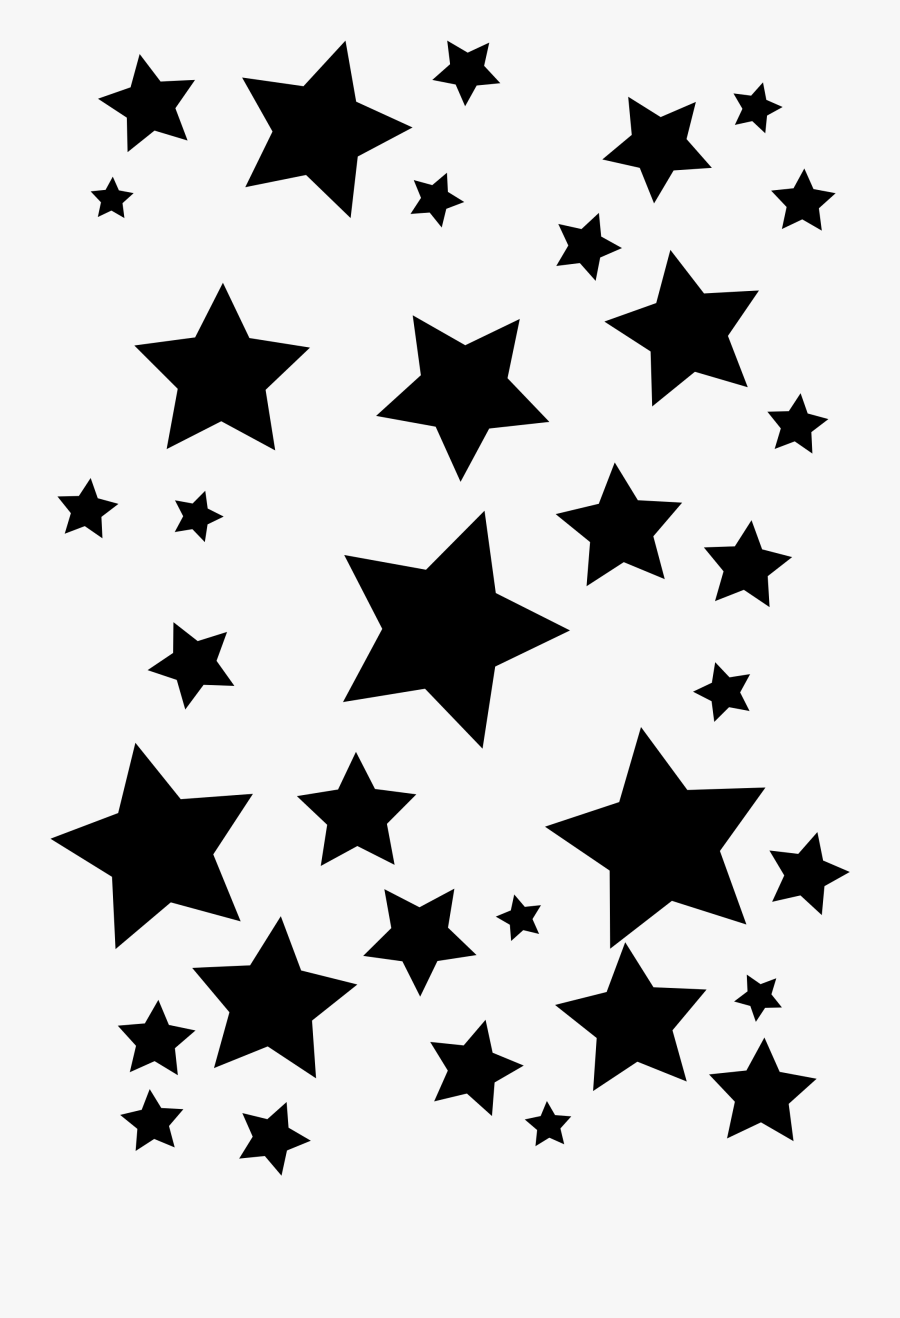 Star Black And White Clipart Transparent Background - Black Star With Transparent Background, Transparent Clipart